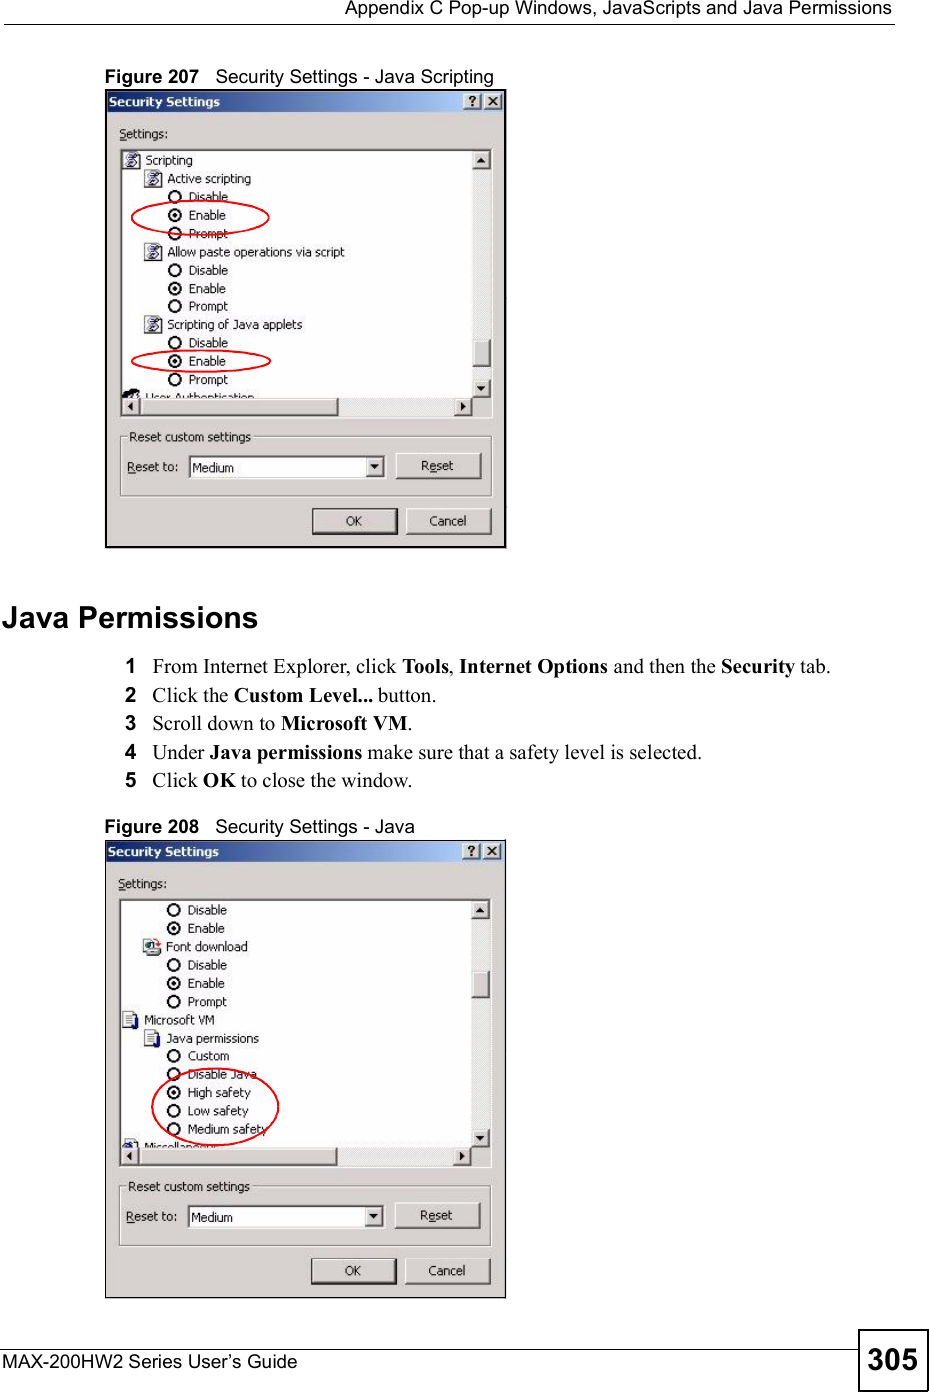  Appendix CPop-up Windows, JavaScripts and Java PermissionsMAX-200HW2 Series User s Guide 305Figure 207   Security Settings - Java ScriptingJava Permissions1From Internet Explorer, click Tools,Internet Options and then the Security tab. 2Click the Custom Level... button. 3Scroll down to Microsoft VM.4Under Java permissions make sure that a safety level is selected.5Click OK to close the window.Figure 208   Security Settings - Java 